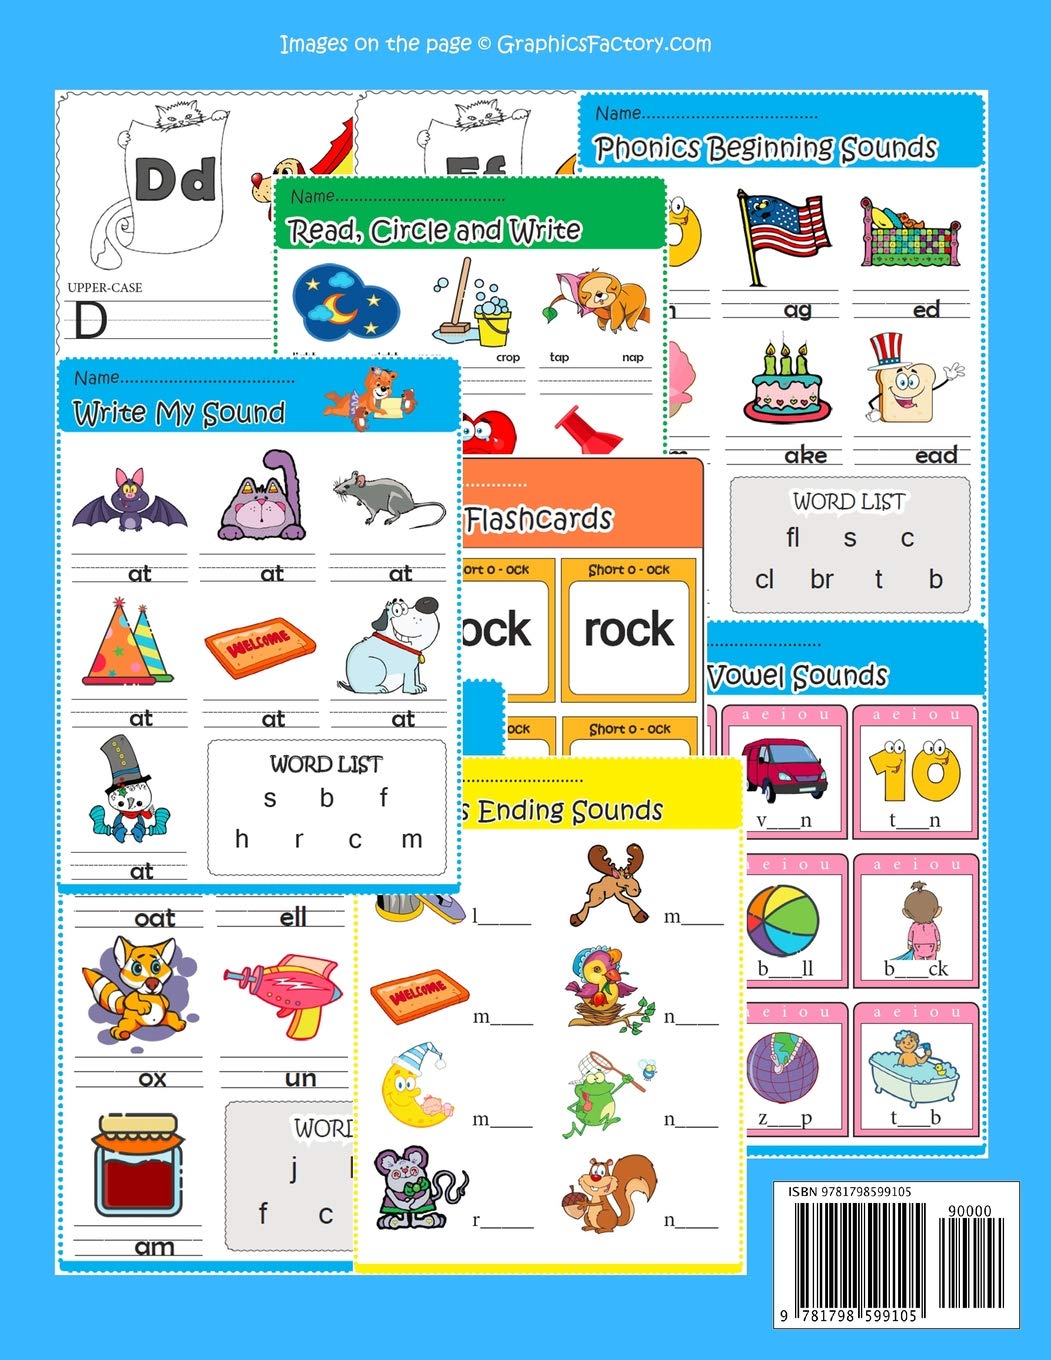 Vowels And Consonants Complete Phonics Workbook: 100 Worksheets cover long and short vowels,beginning and ending sounds, CVC words with pictures in ... grade, ESL and homeschooling kids age 4-8.